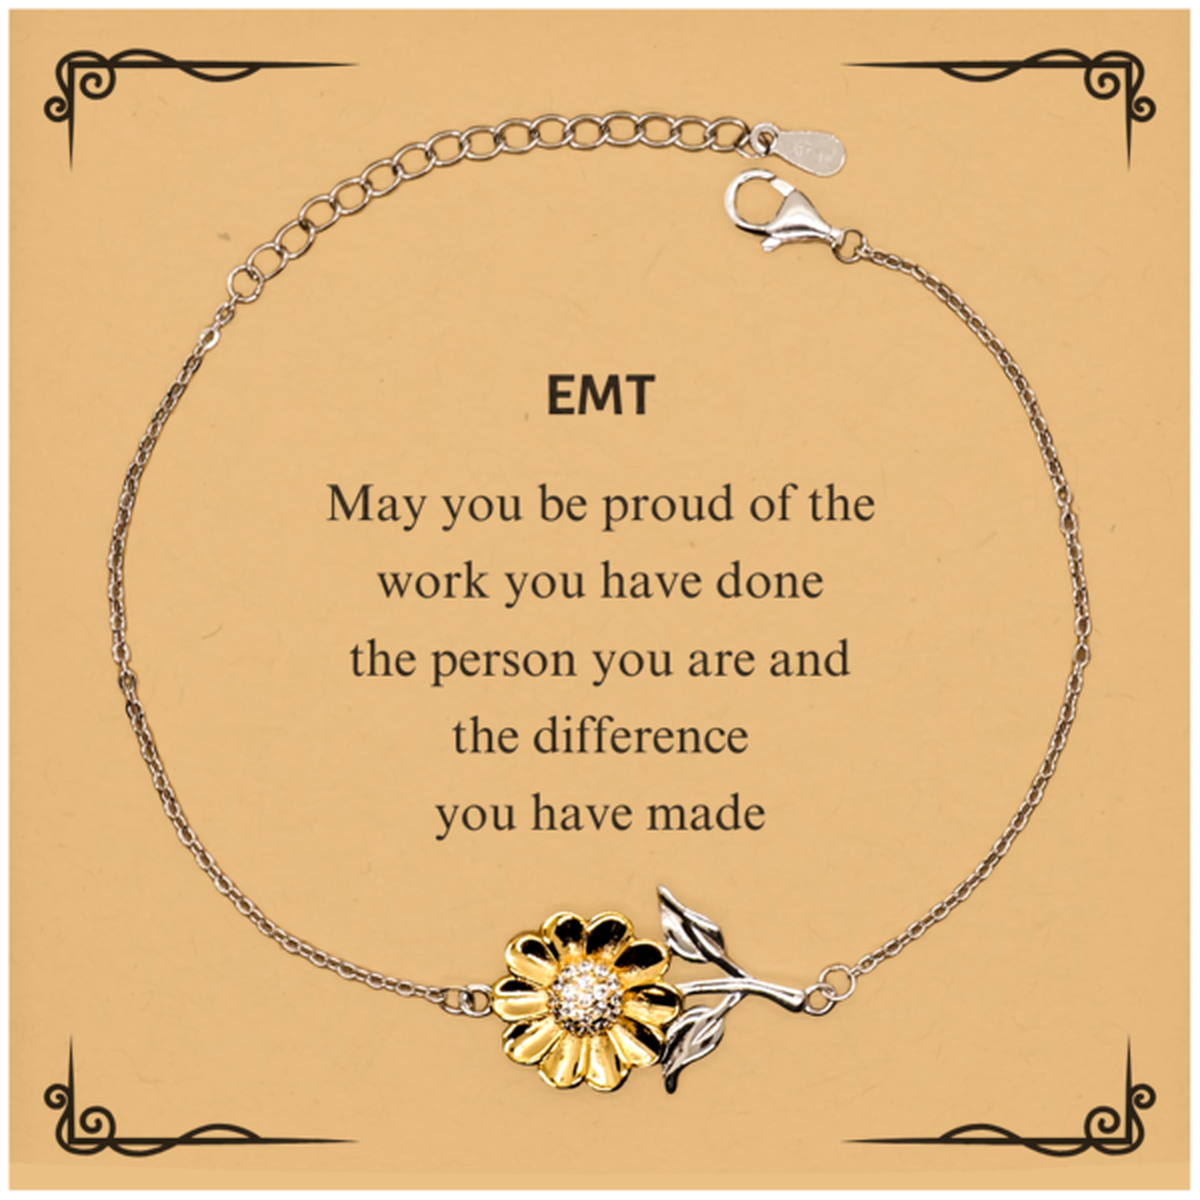 EMT May you be proud of the work you have done, Retirement EMT Sunflower Bracelet for Colleague Appreciation Gifts Amazing for EMT